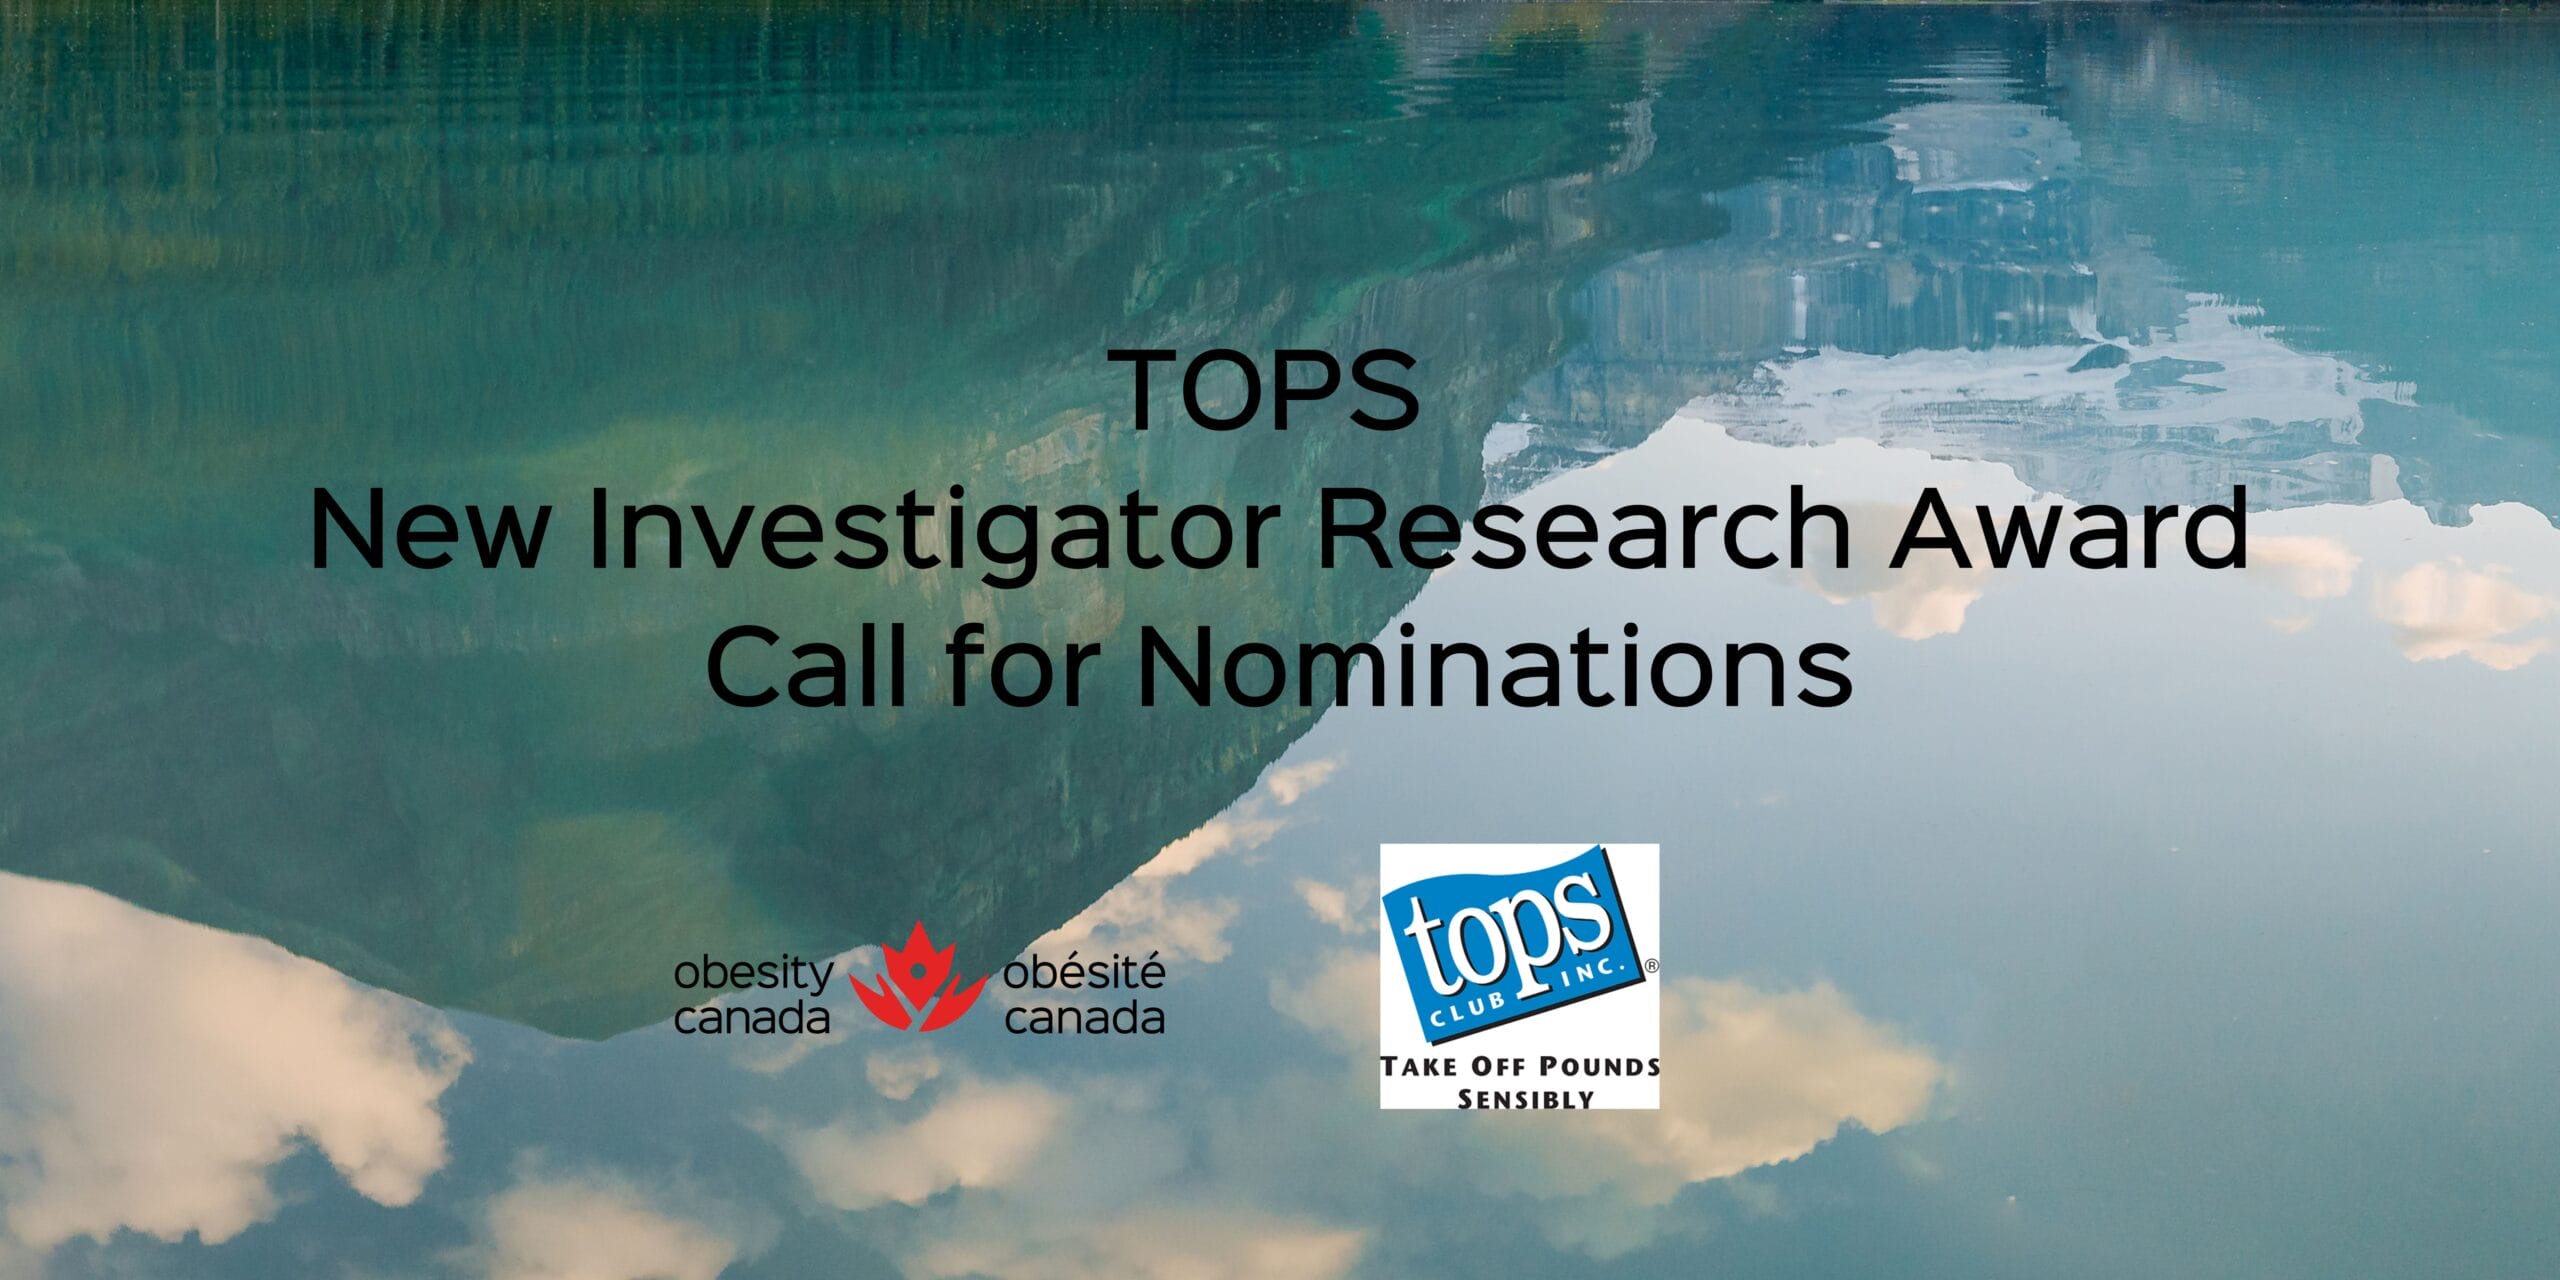 Promotional banner for the tops new investigator research award featuring serene lake reflections and logos of obesity canada and tops.